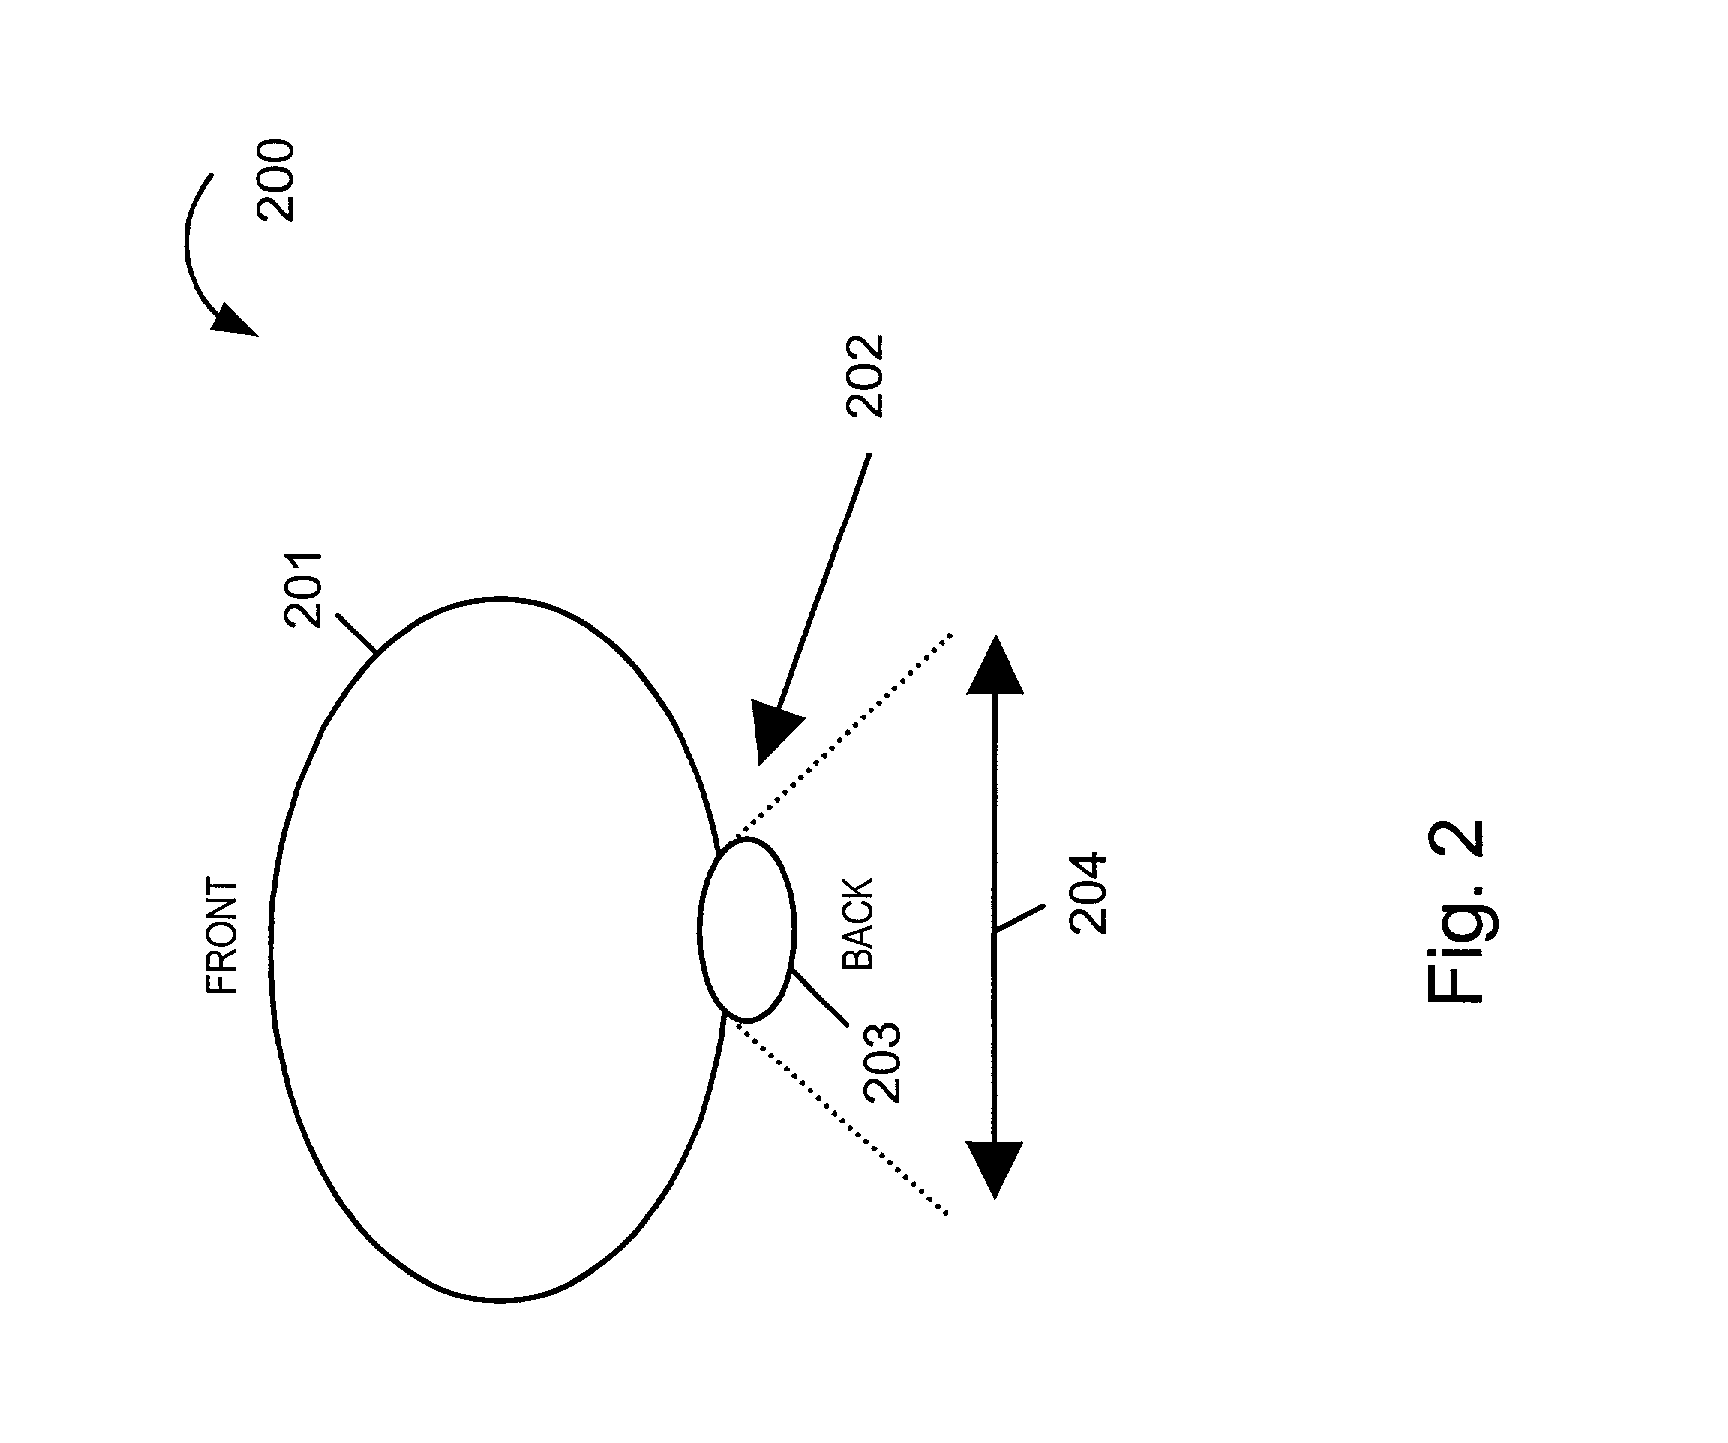 Steerable antenna and receiver interface for terrestrial broadcast